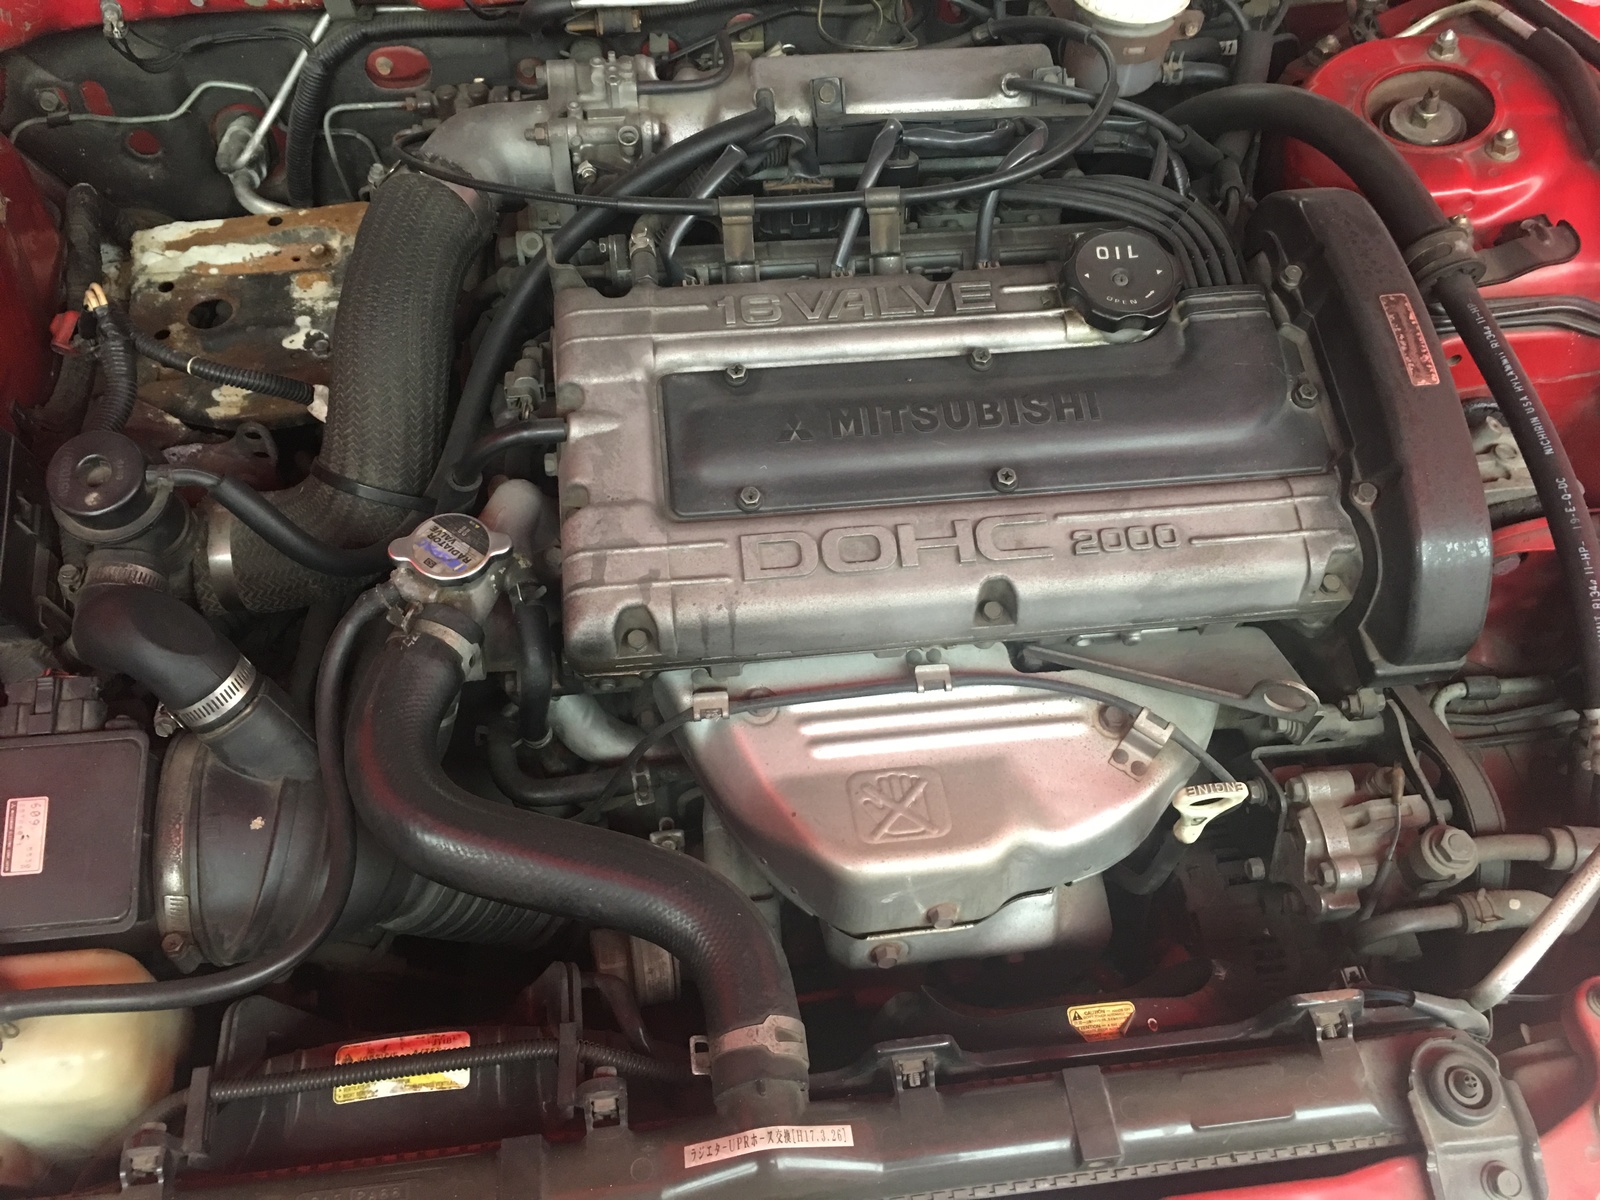 Mitsubishi Eclipse Questions What Model Or Engine Is In This